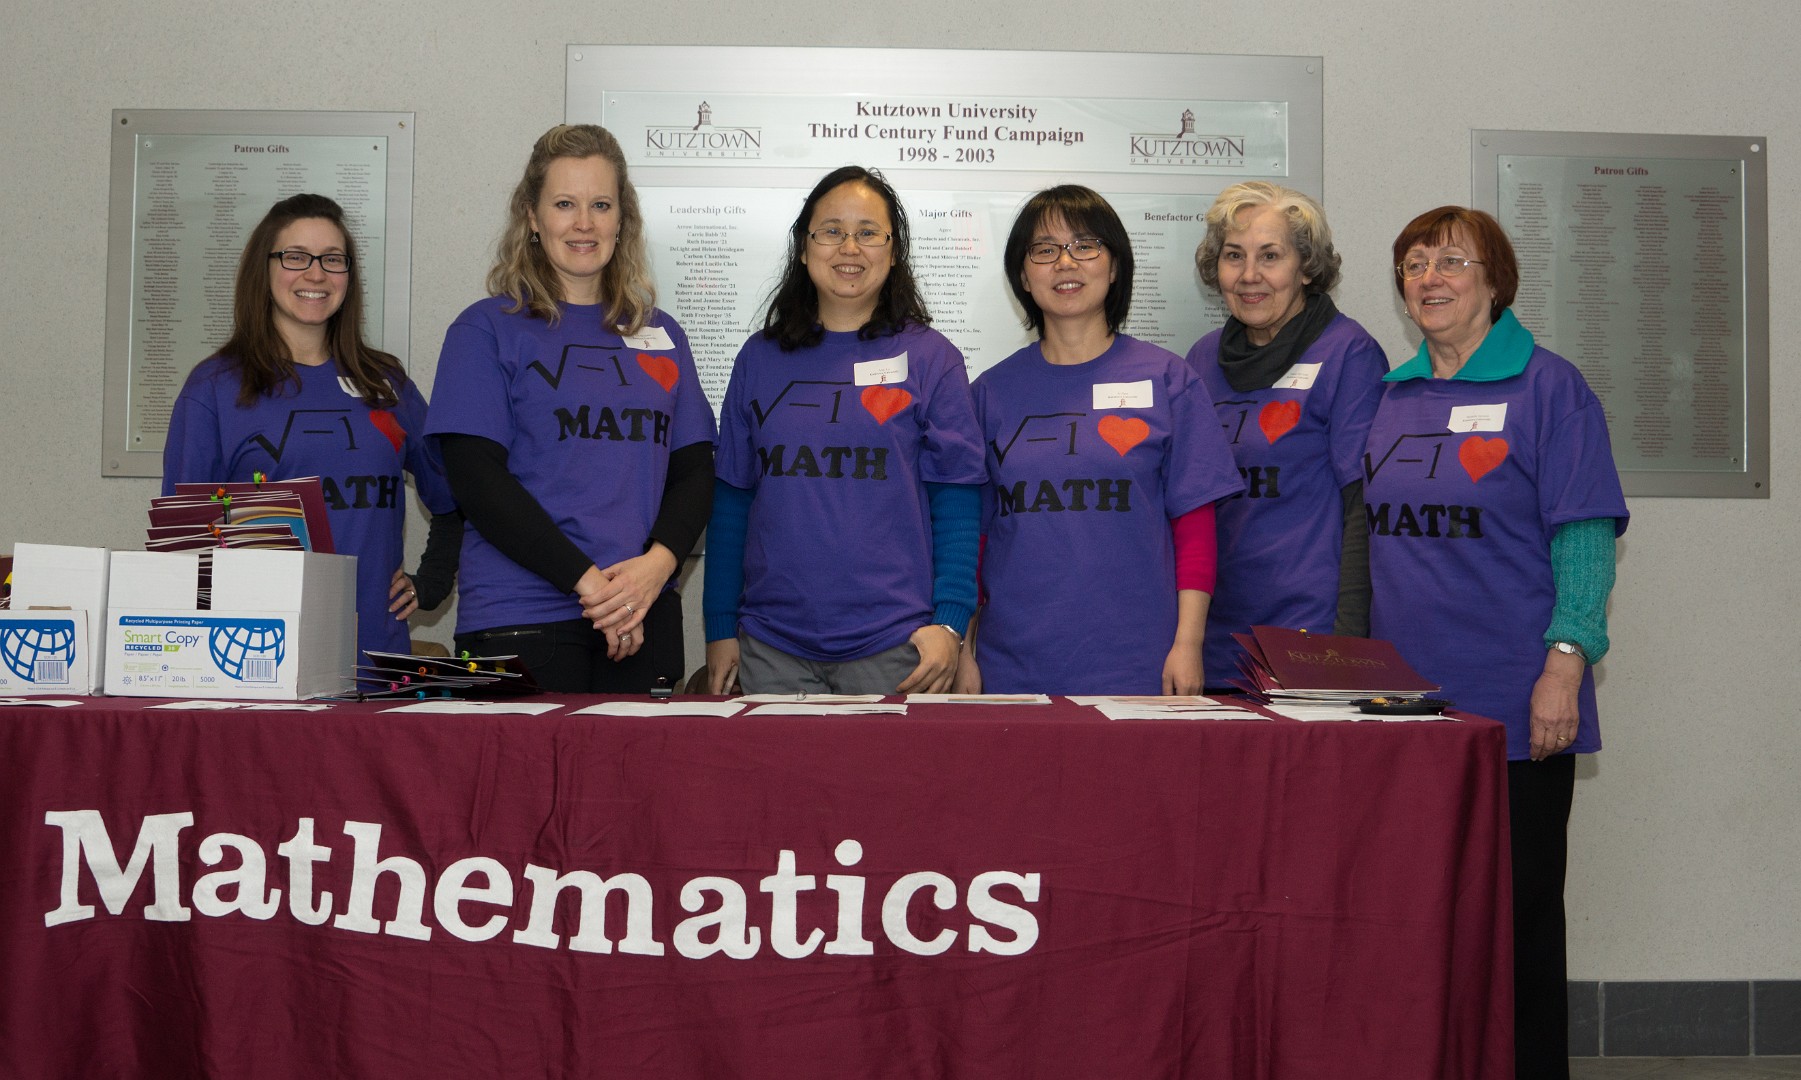 HS Math Day organizers standing at a recruitment table